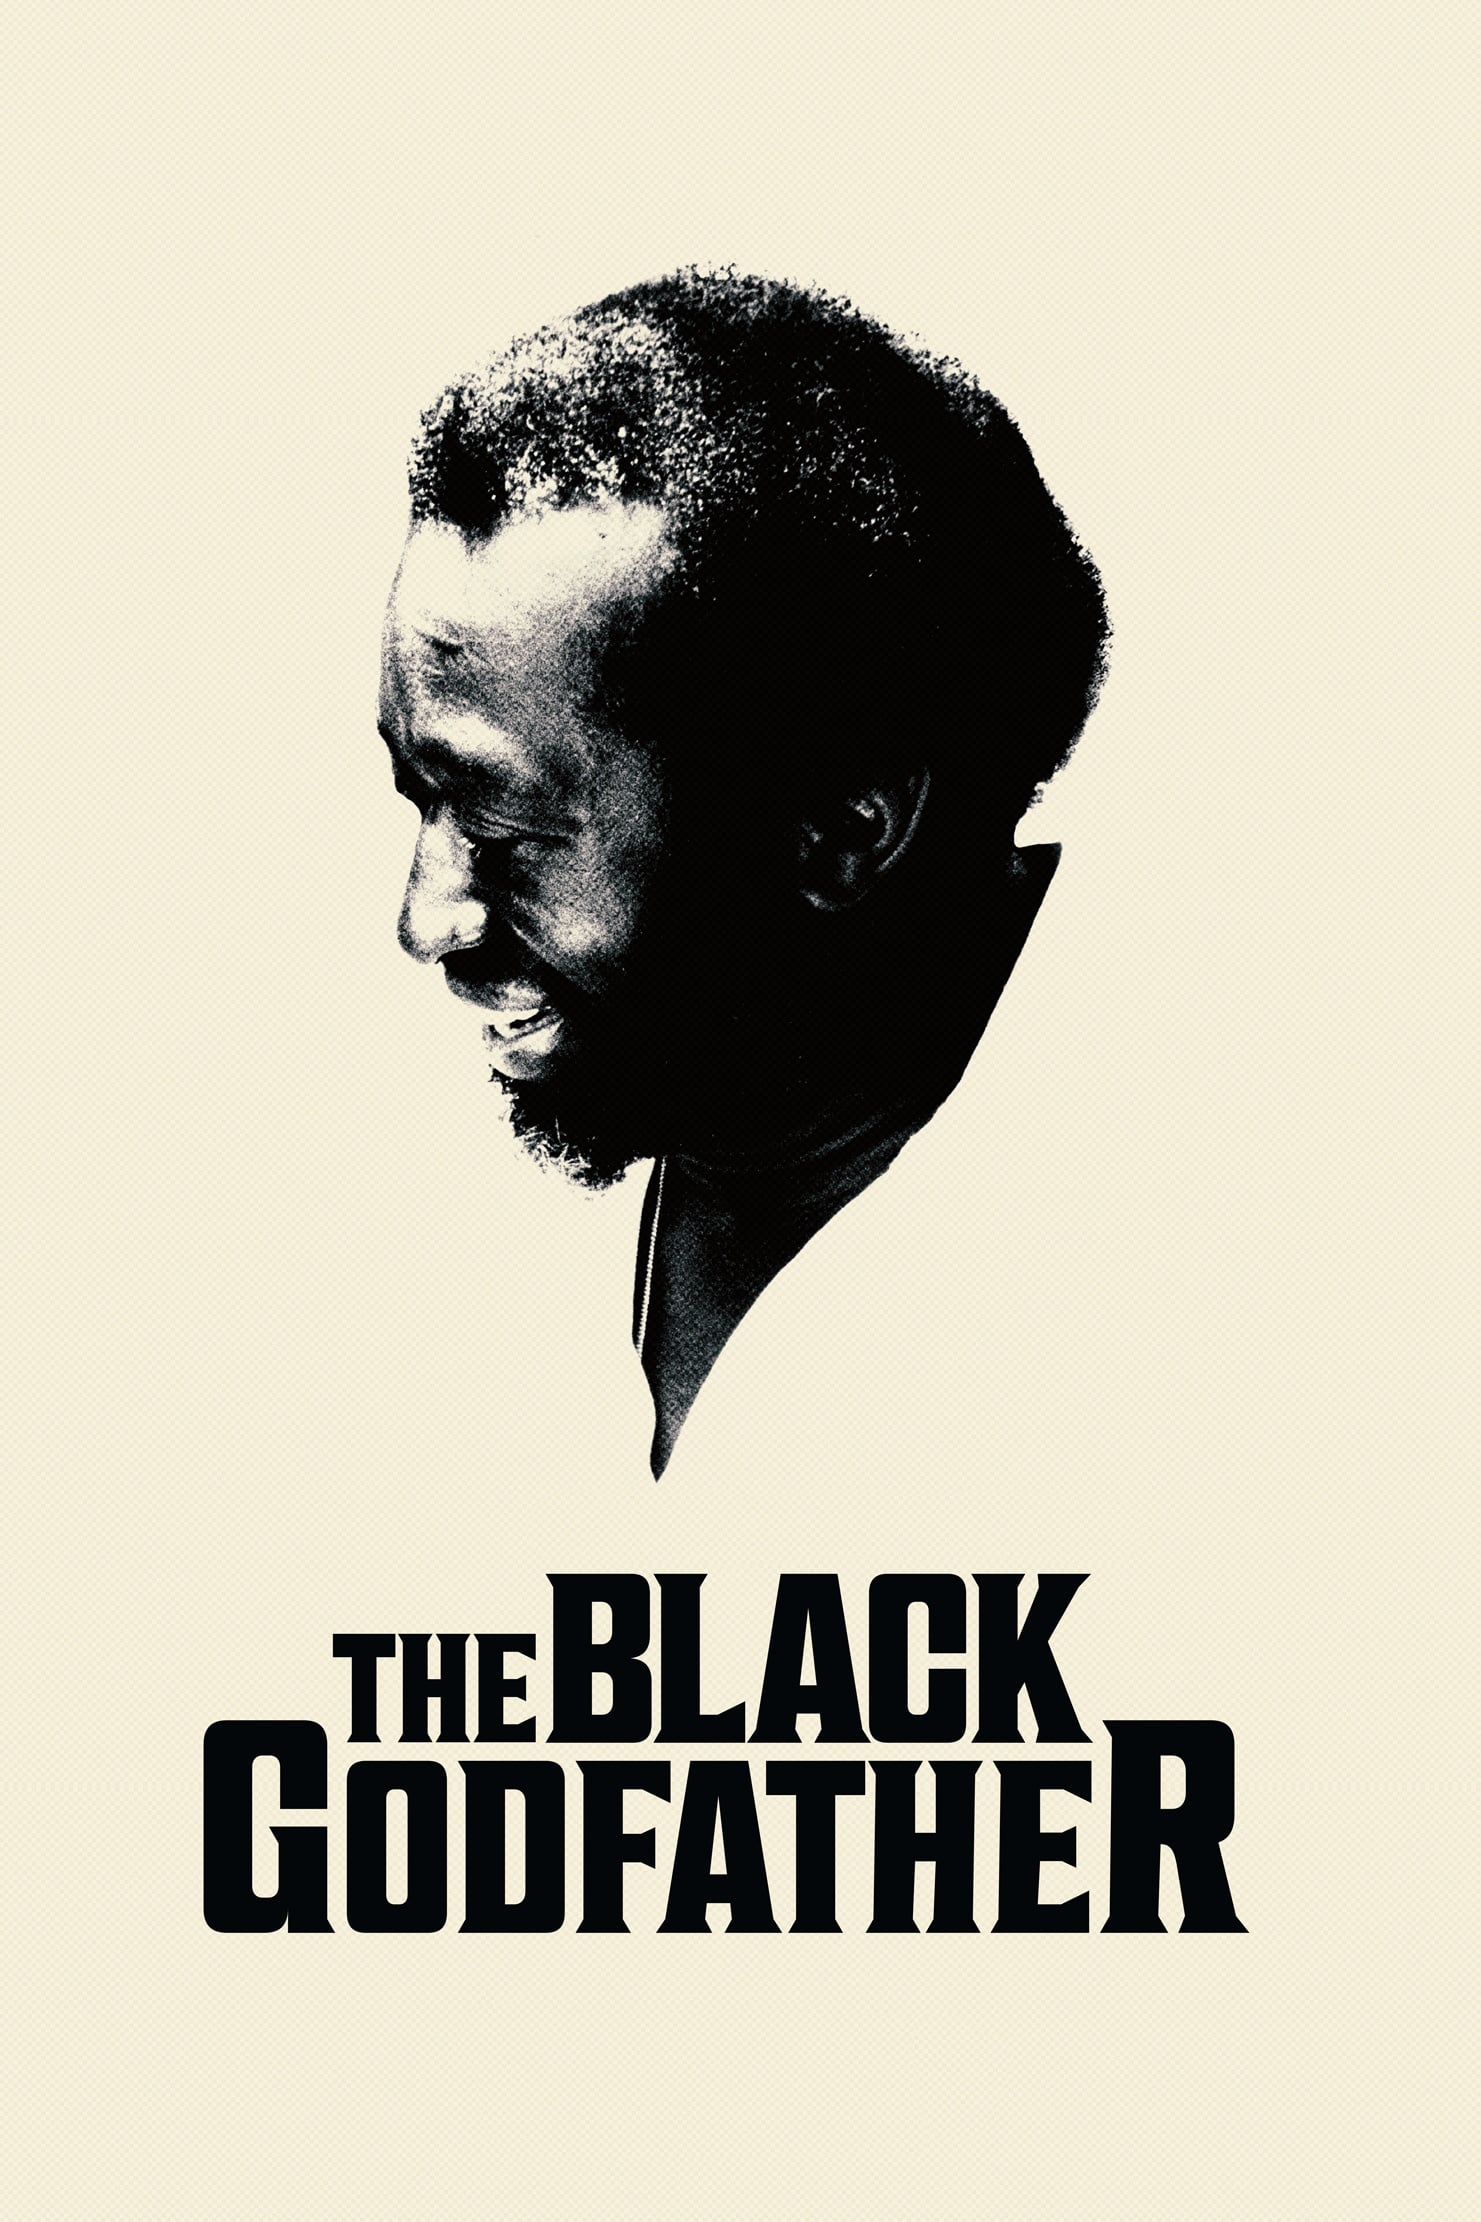 Banner Phim Huyền thoại Clarence Avant (The Black Godfather)